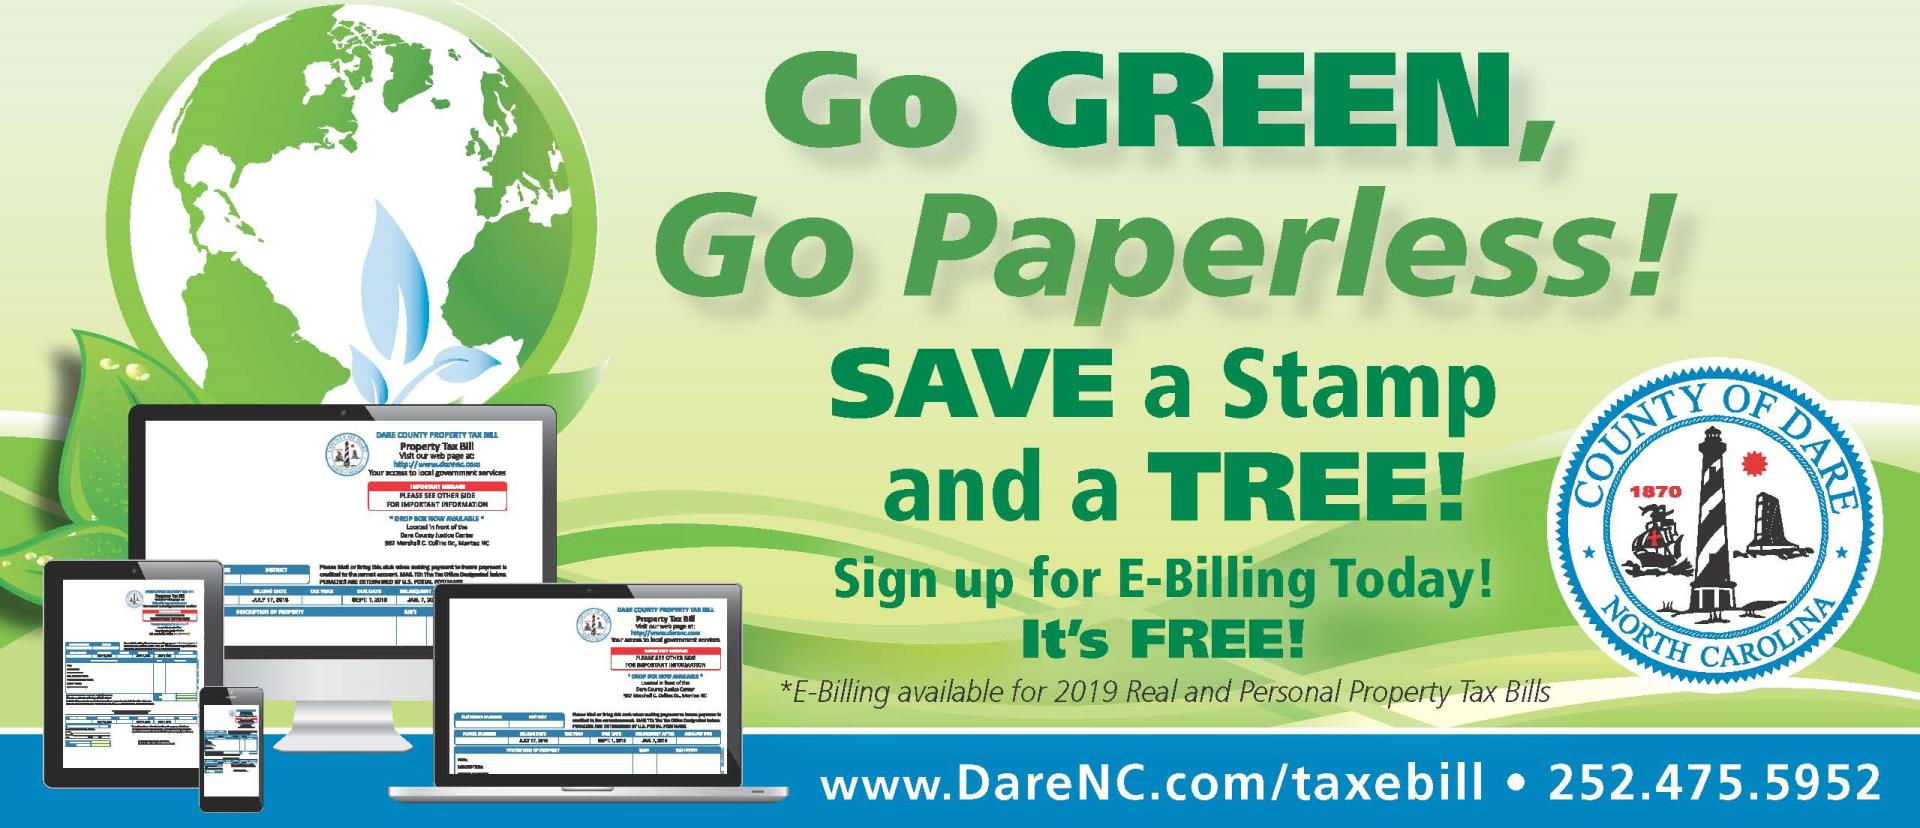 Go Green! Go Paperless! Save a Stamp and a Tree! Sign up for ebilling today! www.darenc.com/taxebill